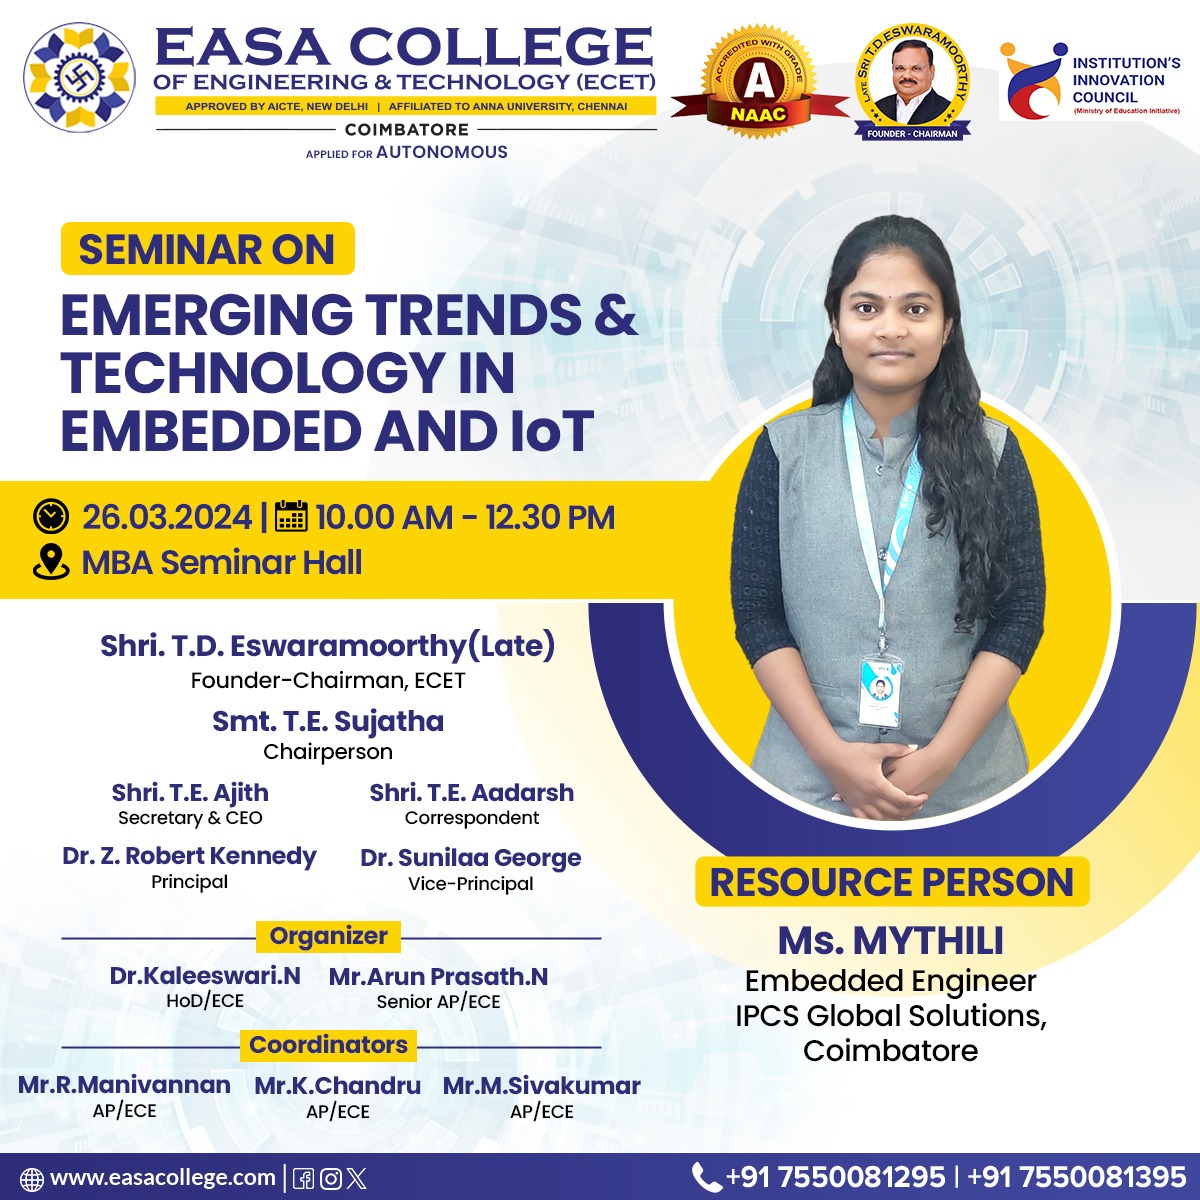 Mar 26 2024 - Seminar on Embedded Trands & Technology in Embdded and IoT